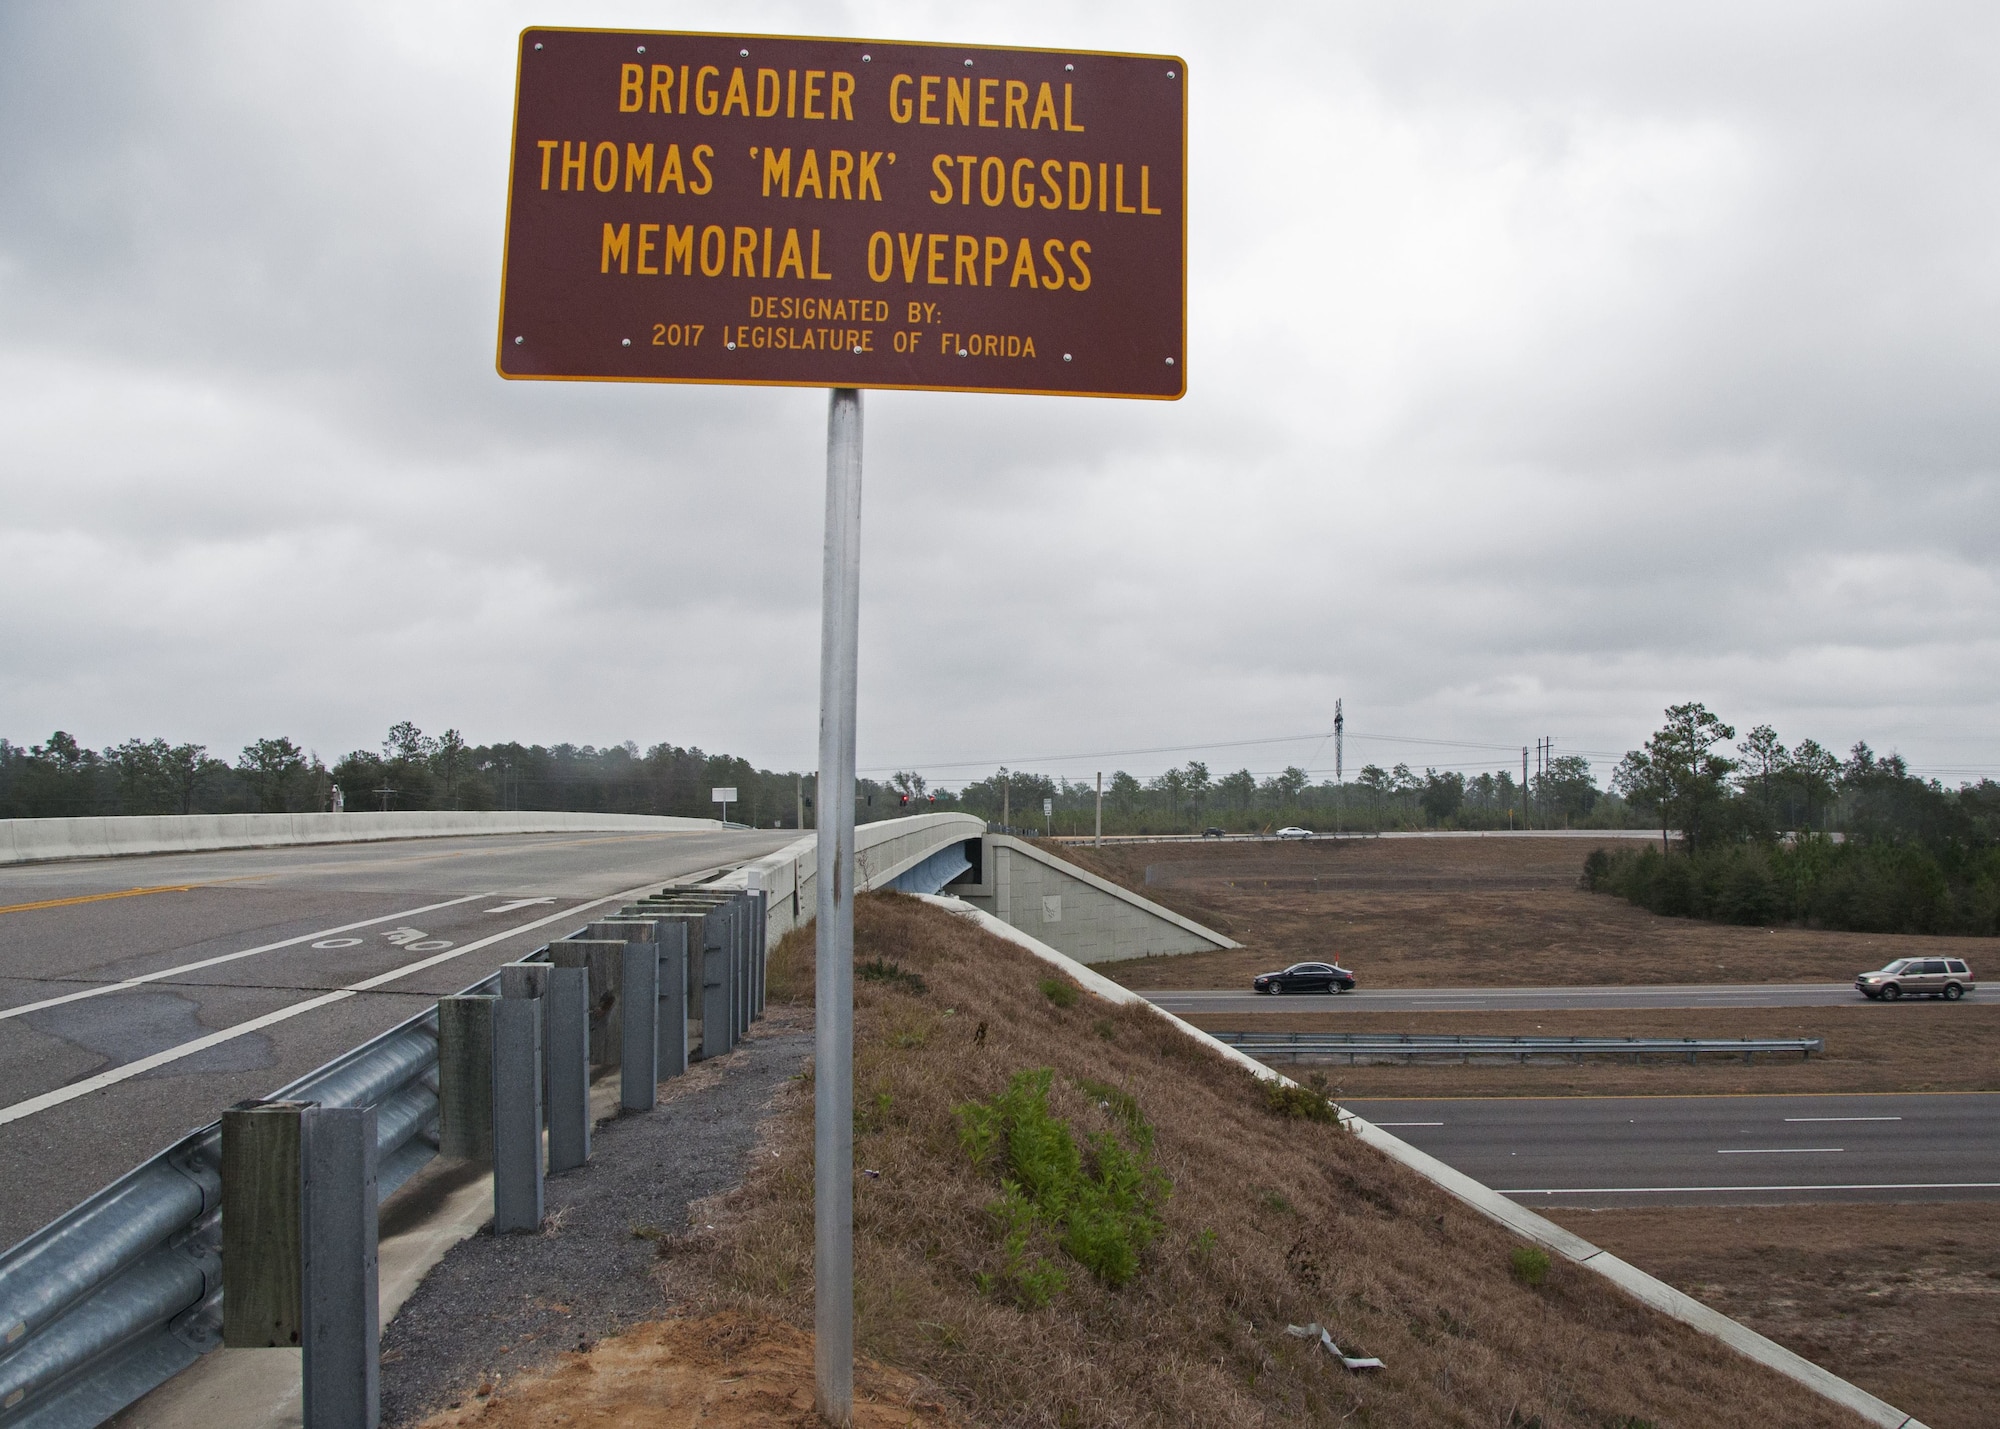 A freshly installed sign dedicated to the memory of the late Brig. Gen. Thomas “Mark” Stogsdill stands above the Florida State Road 85 overpass